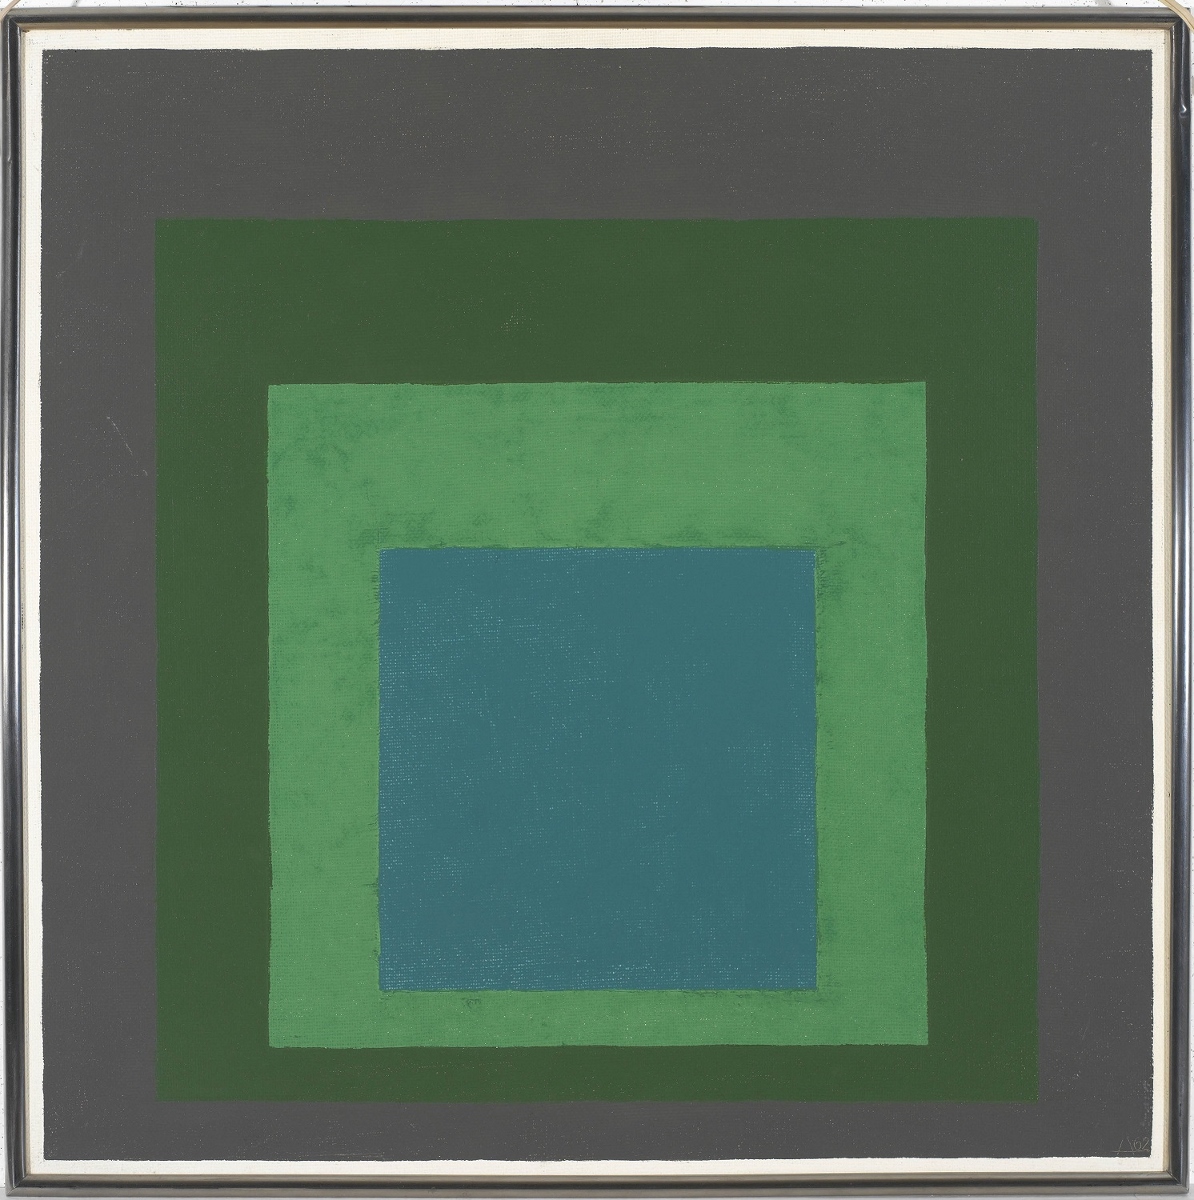 Josef and Anni Albers - Voyage inside a blind experience